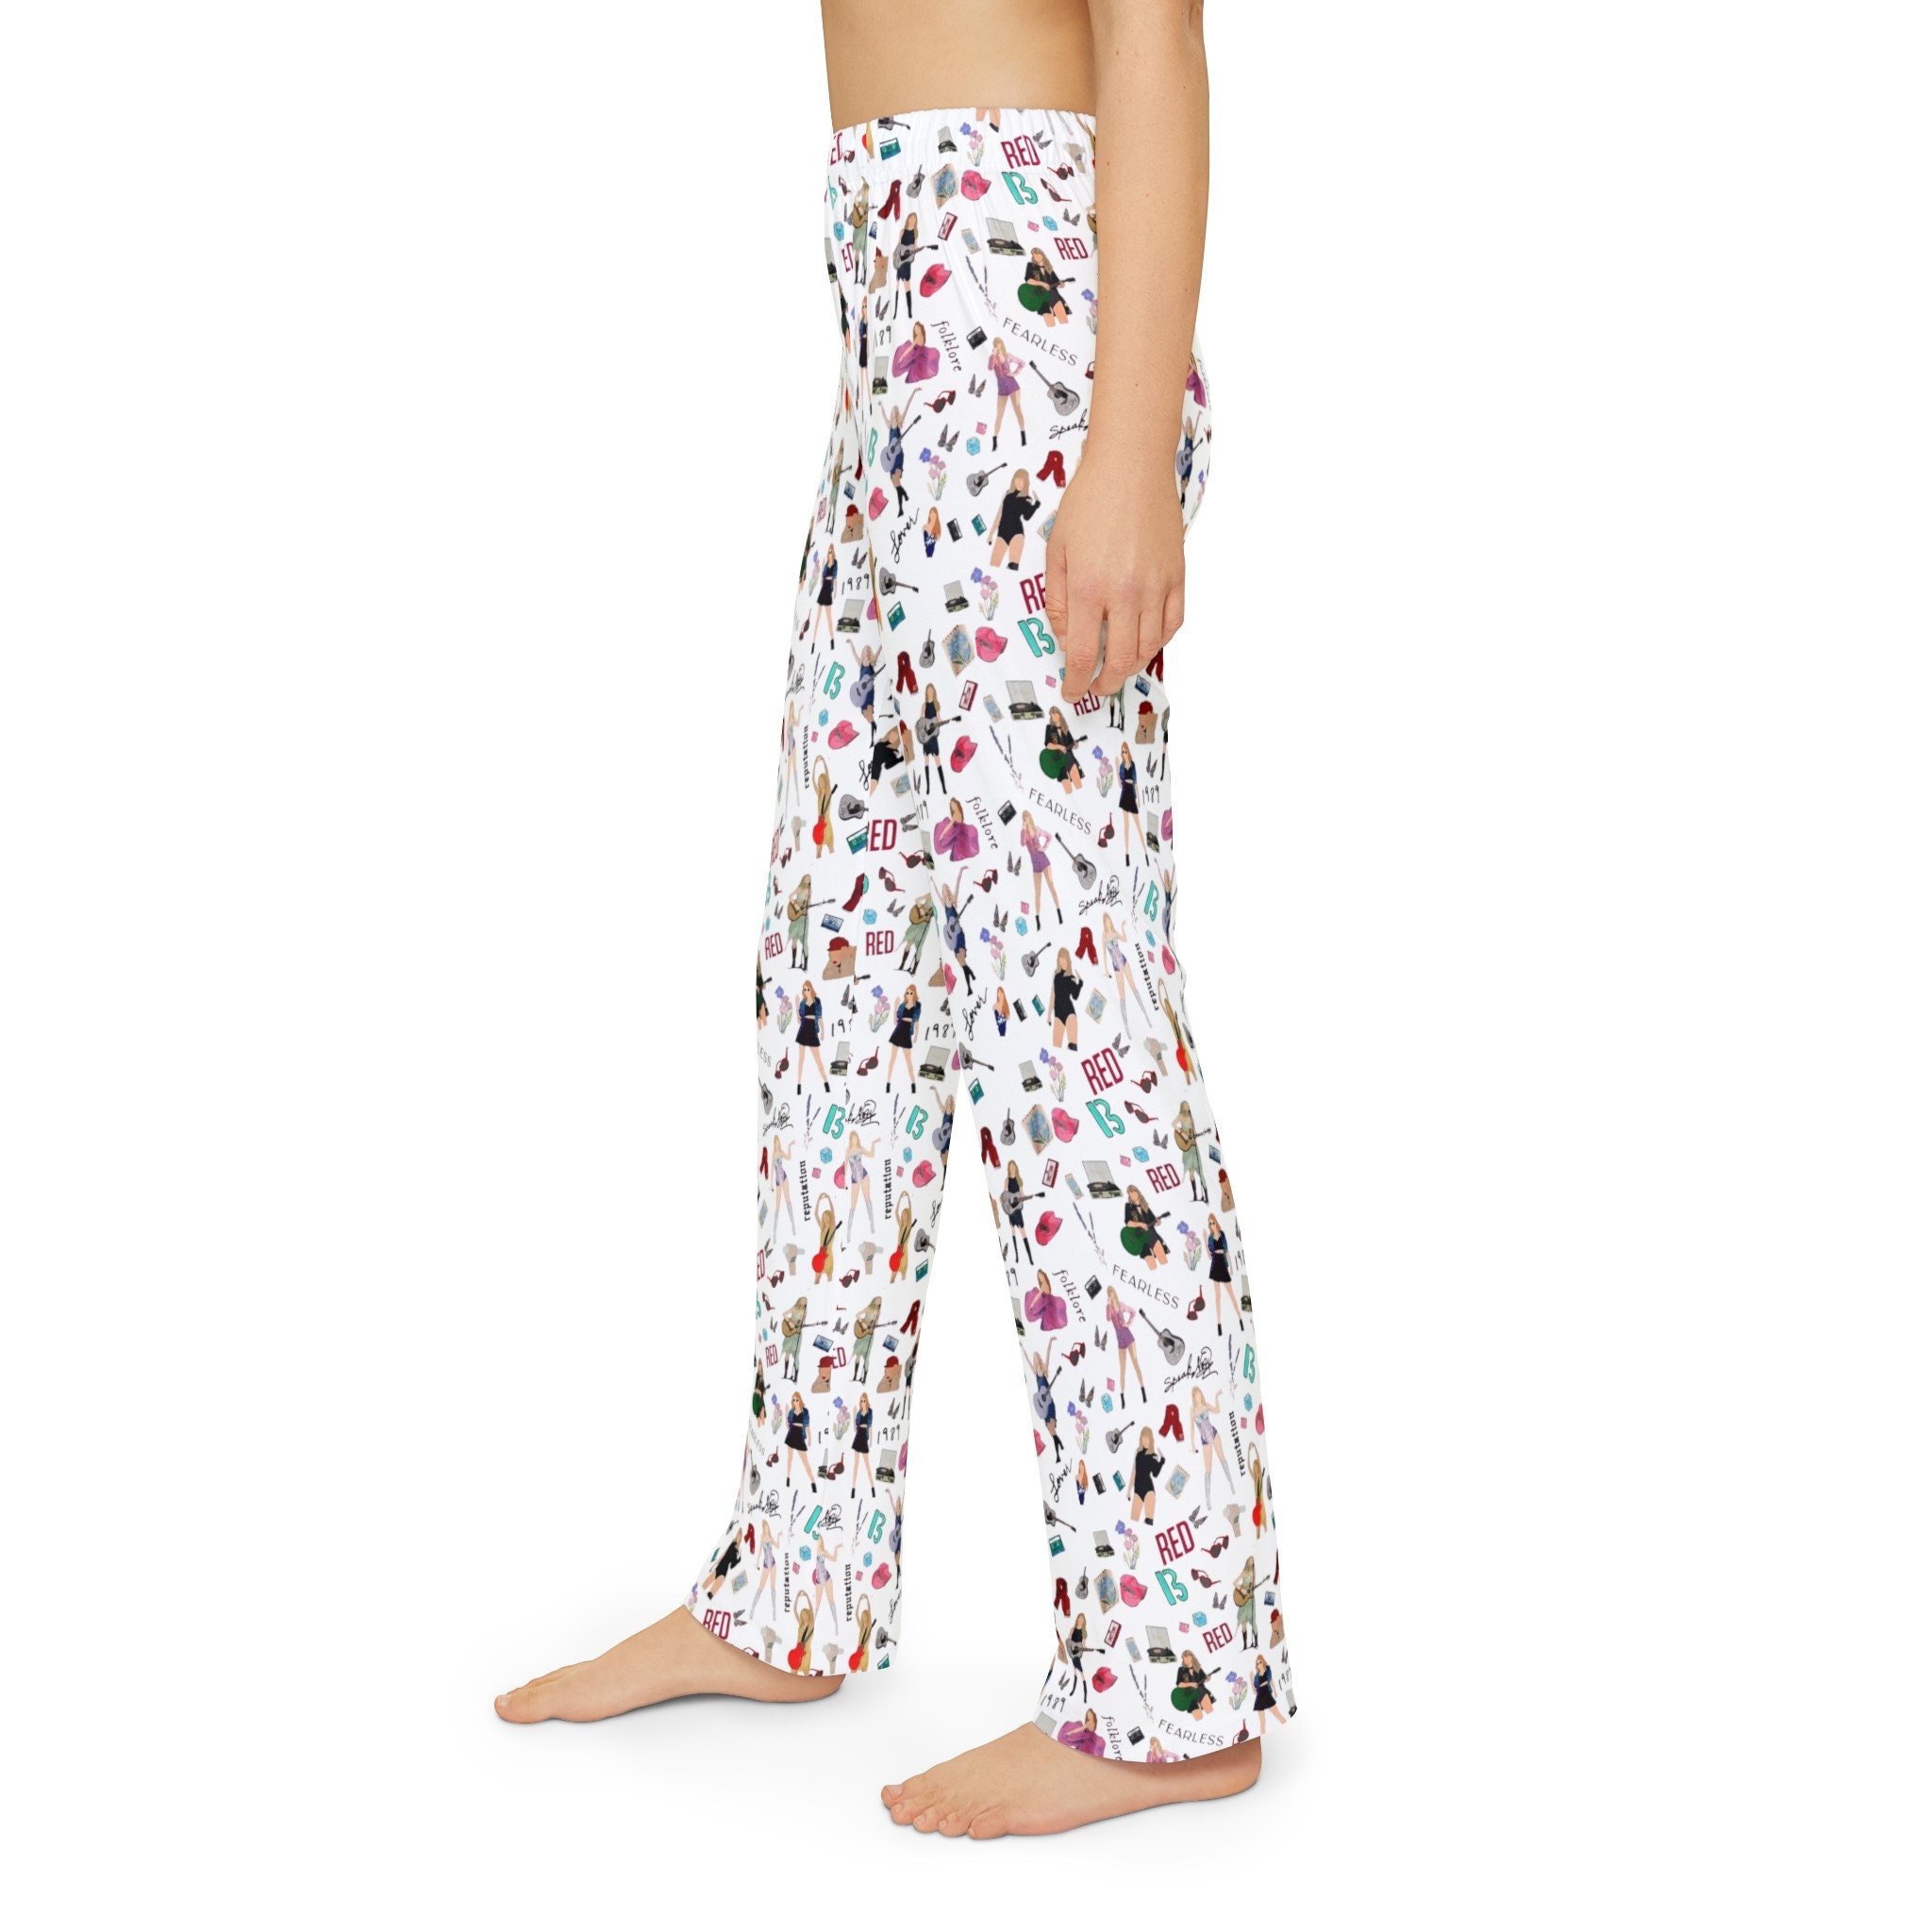 Taylor Pajama Pants, Taylor Merch, Gift For Mother's day